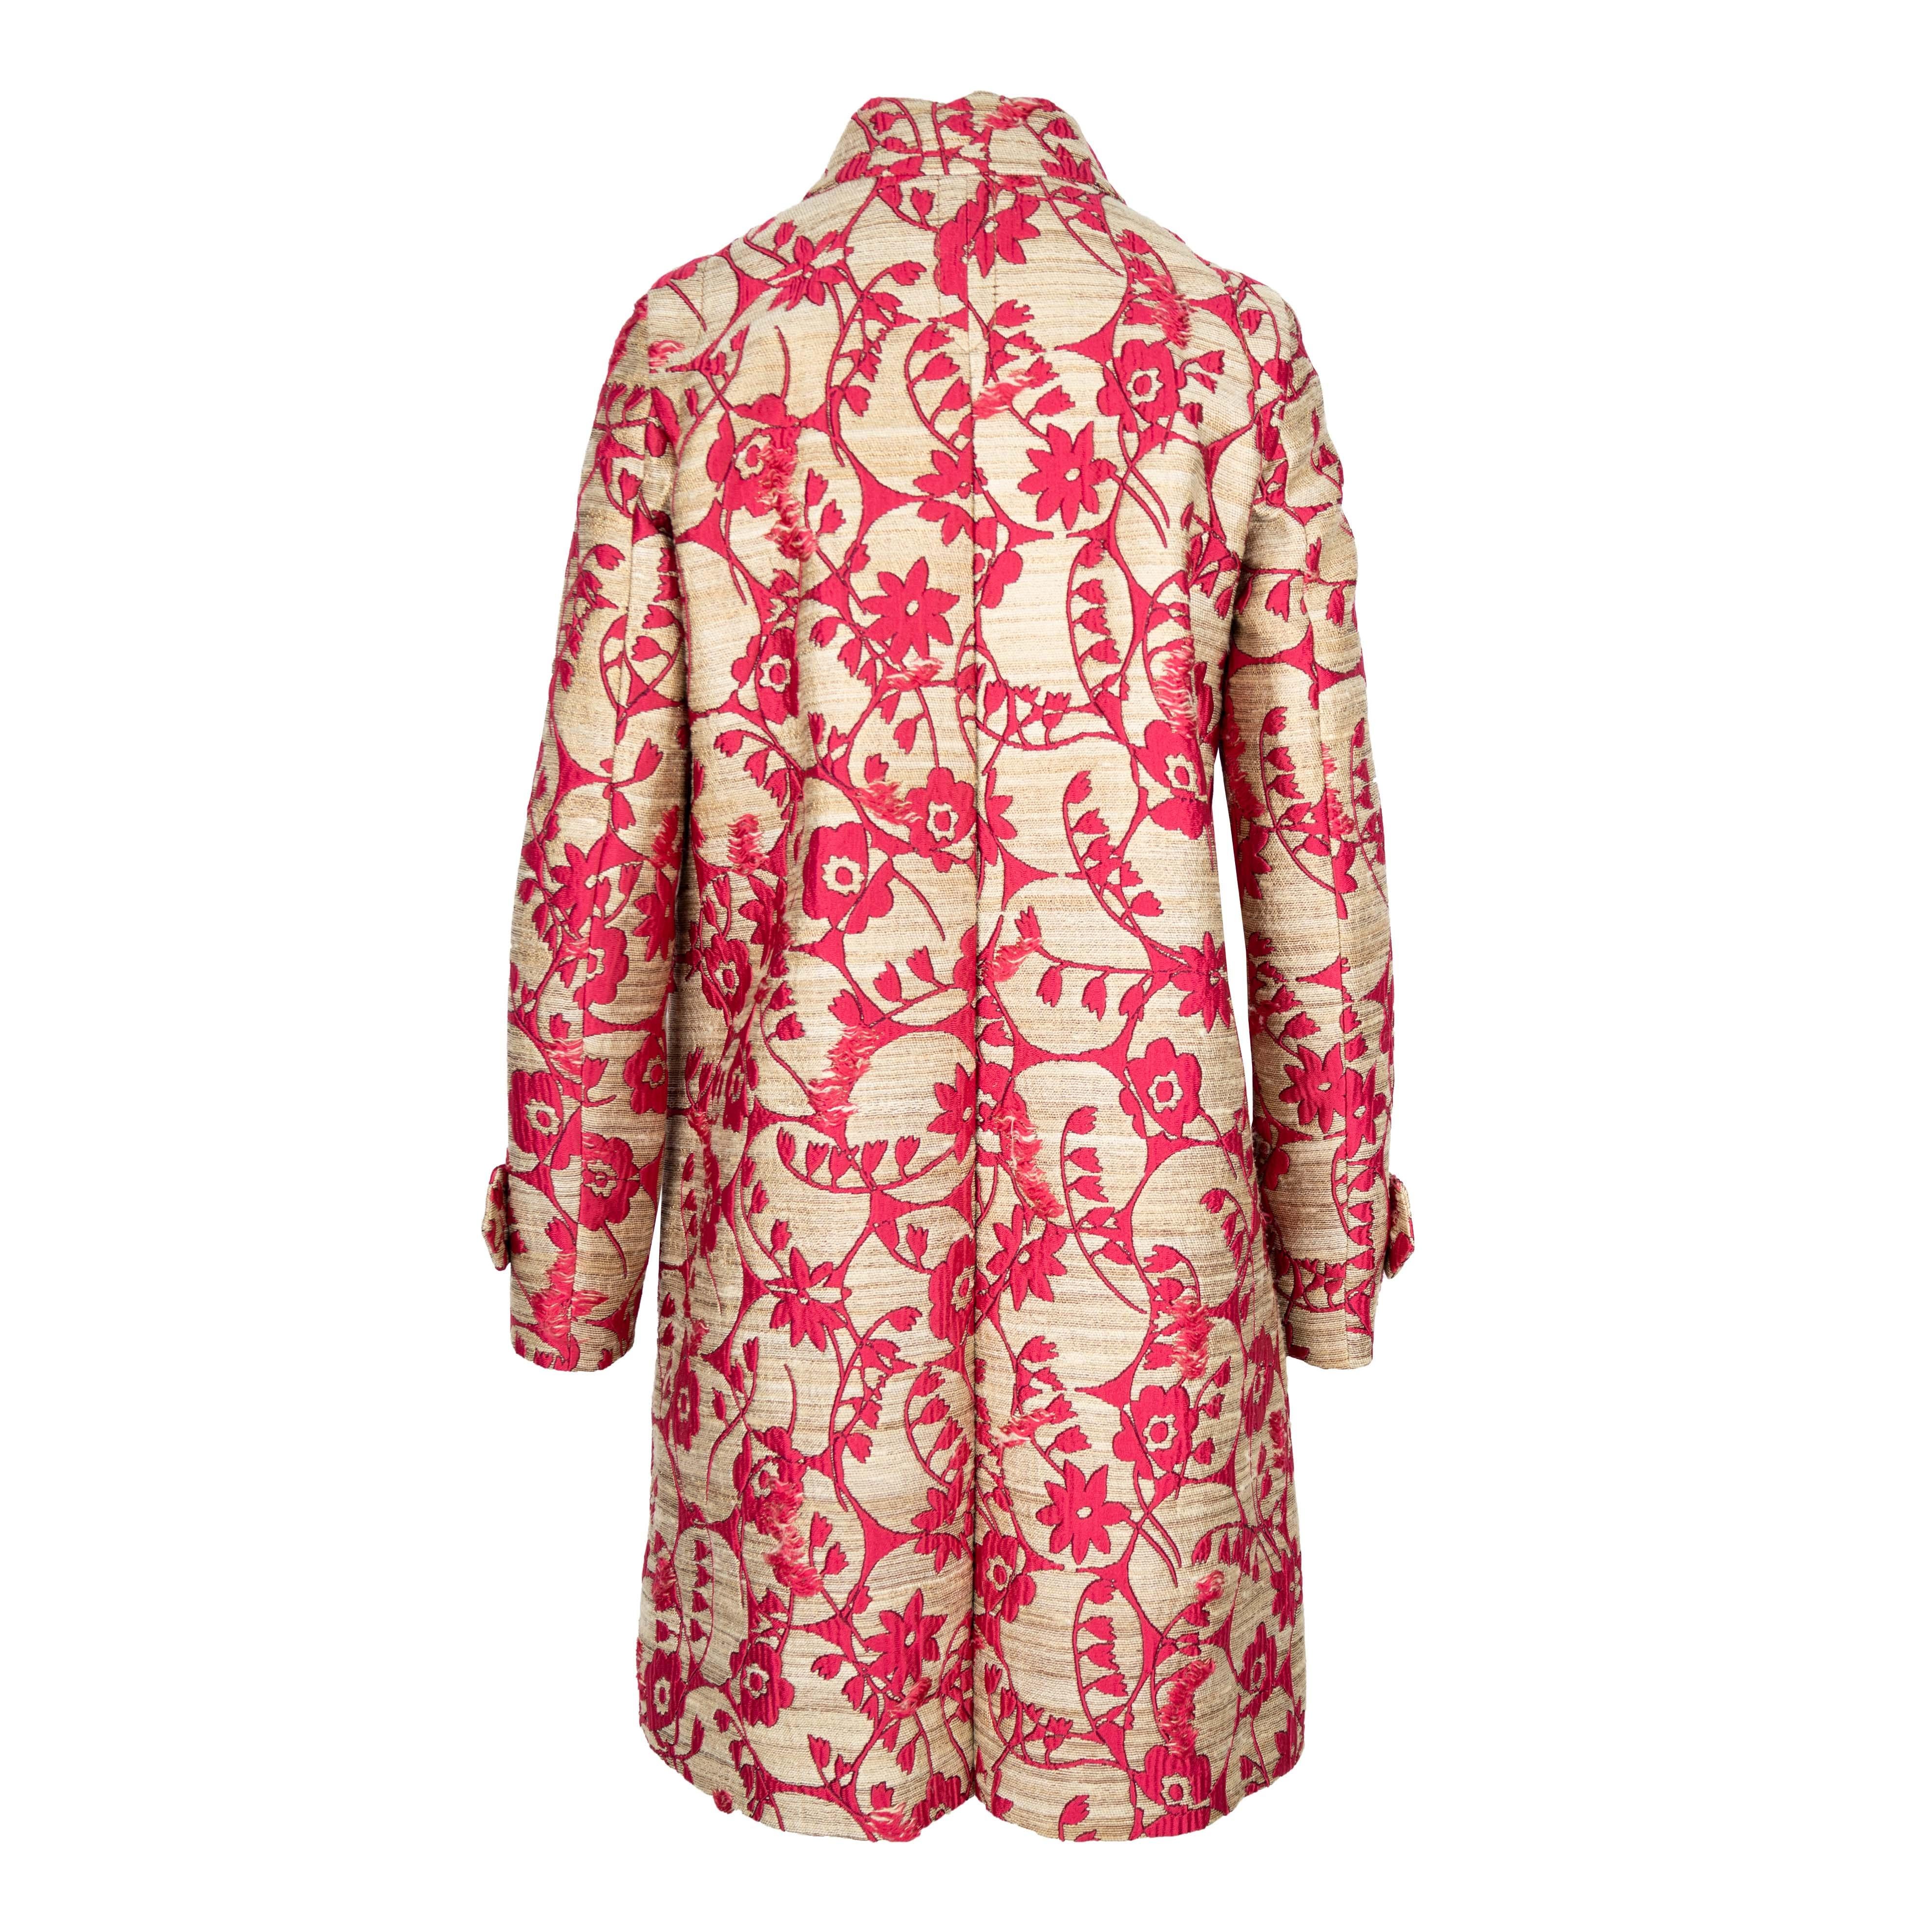 This Valentino Silk Blend Jacquard Coat is a timeless piece of fashion. Woven with Tussah silk and featuring a raffia-like texture and subtle golden shimmer, the floral-patterned coat is a distinctive addition to any wardrobe. Featuring long